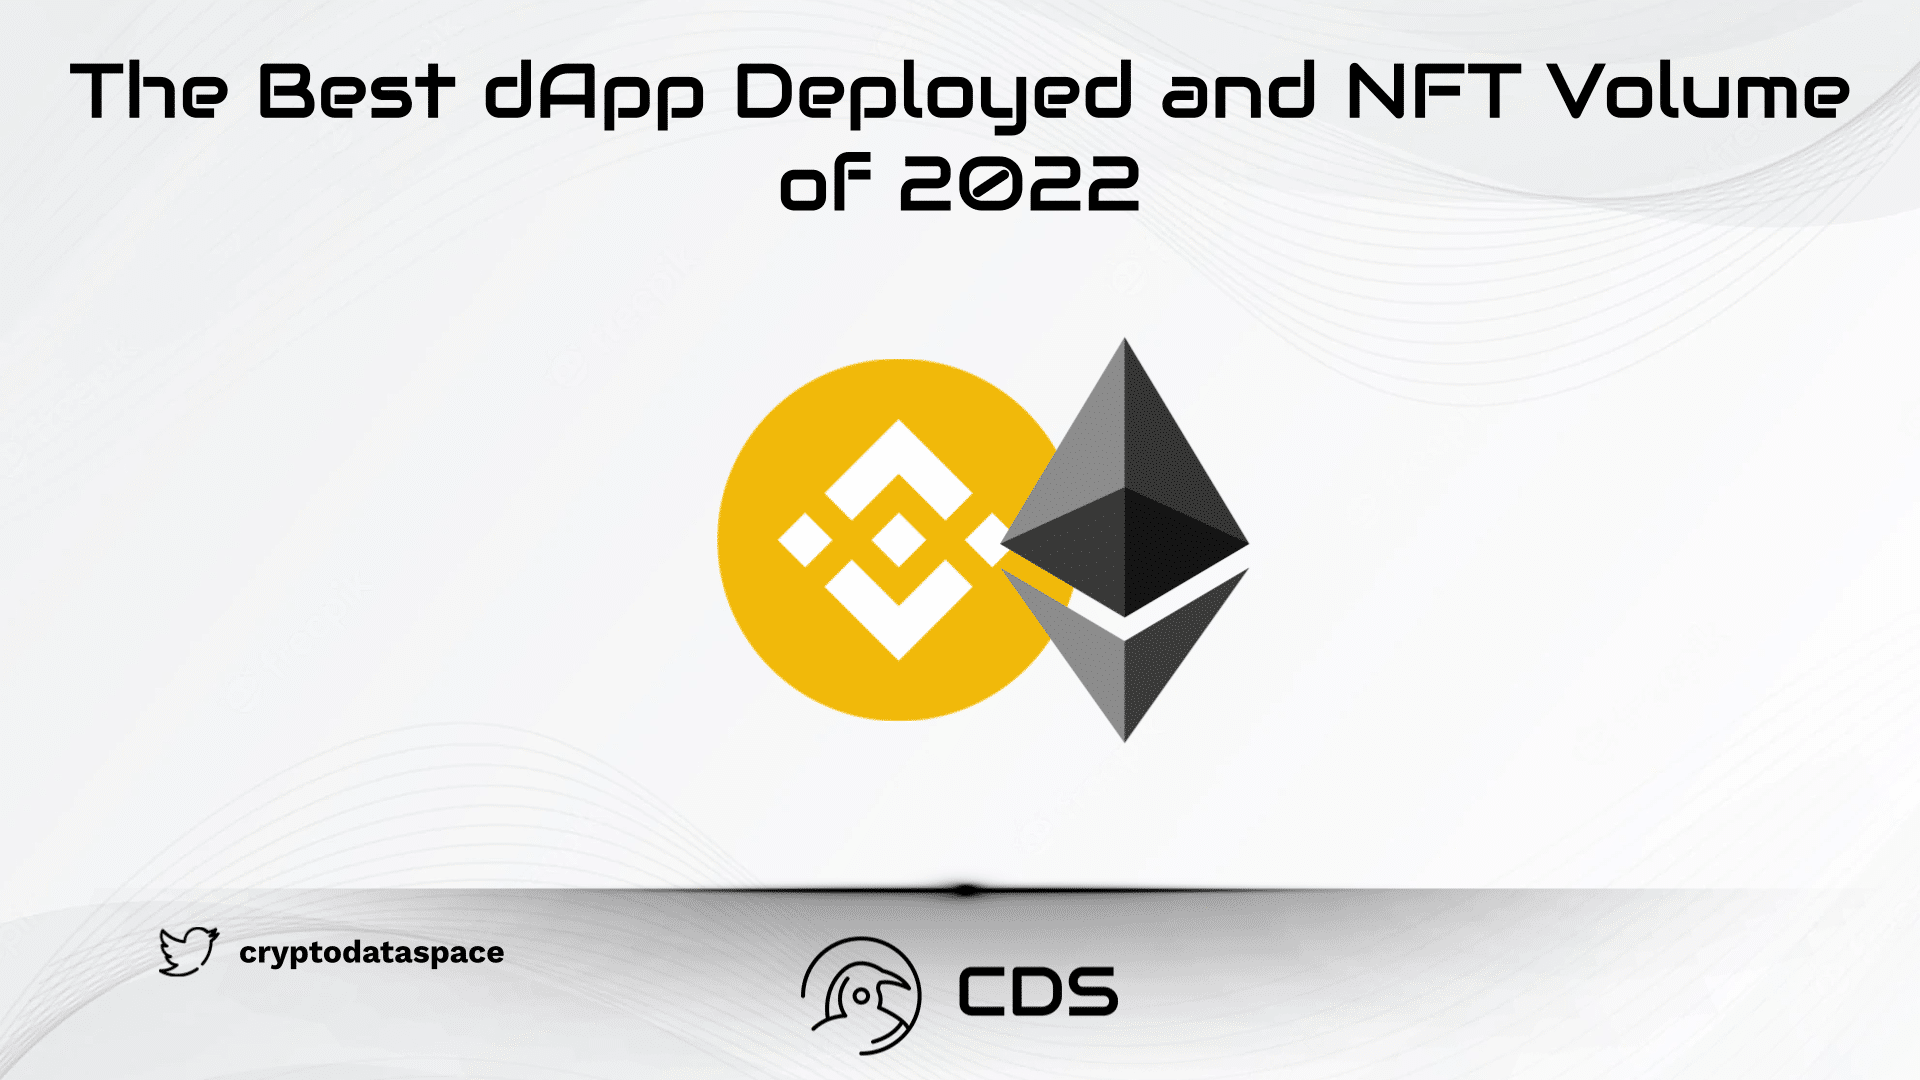 The Best dApp Deployed and NFT Volume of 2022